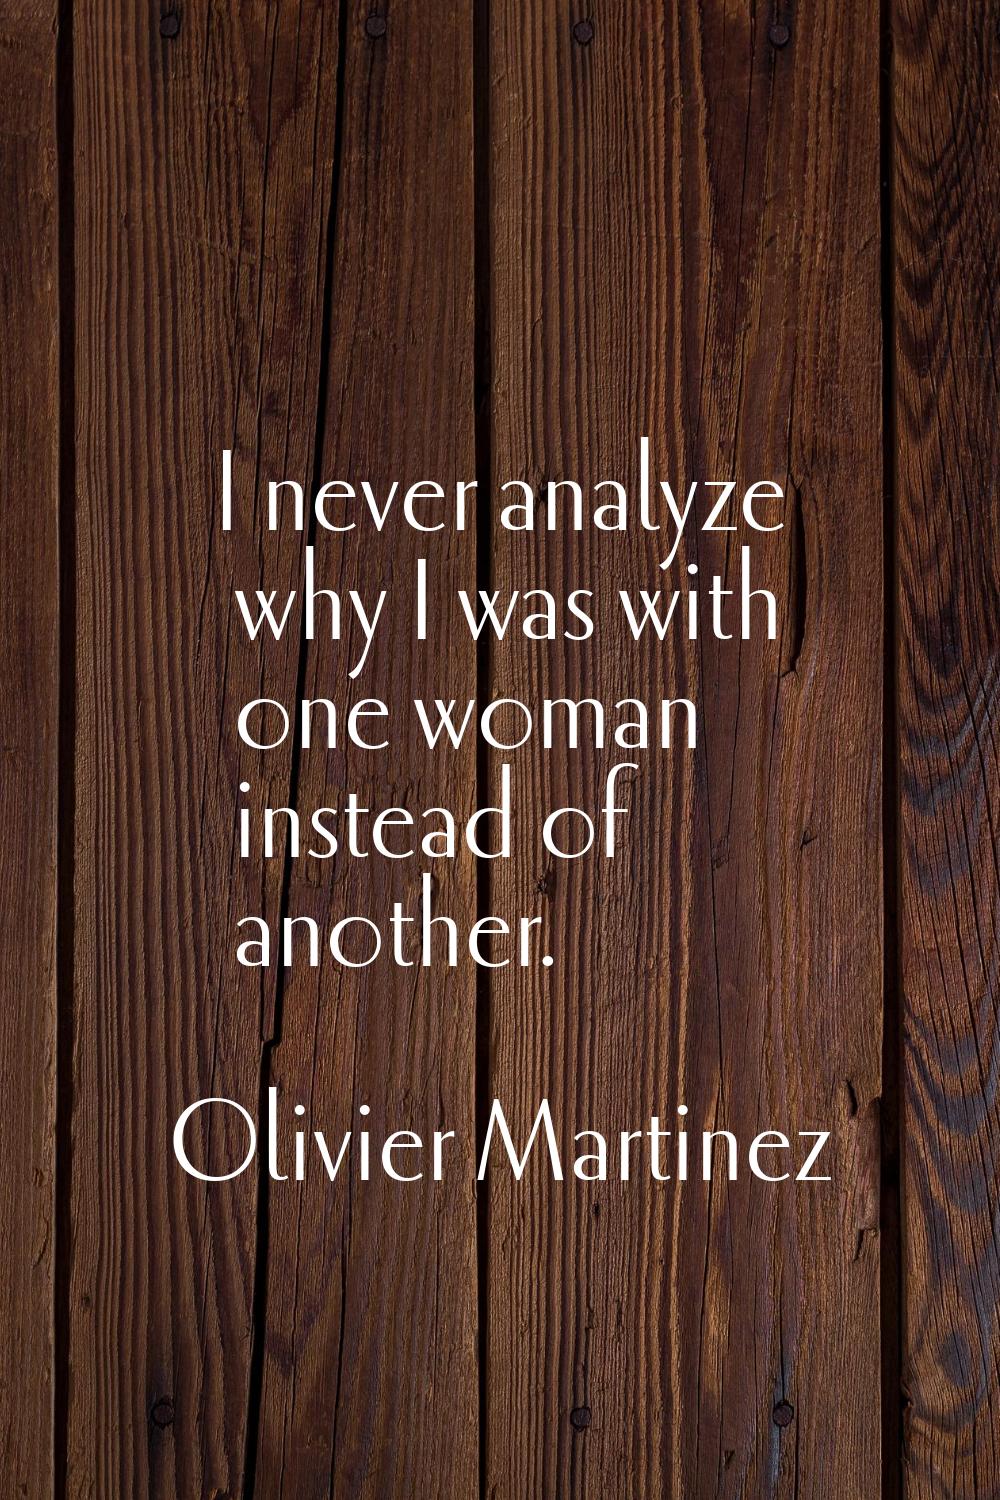 I never analyze why I was with one woman instead of another.